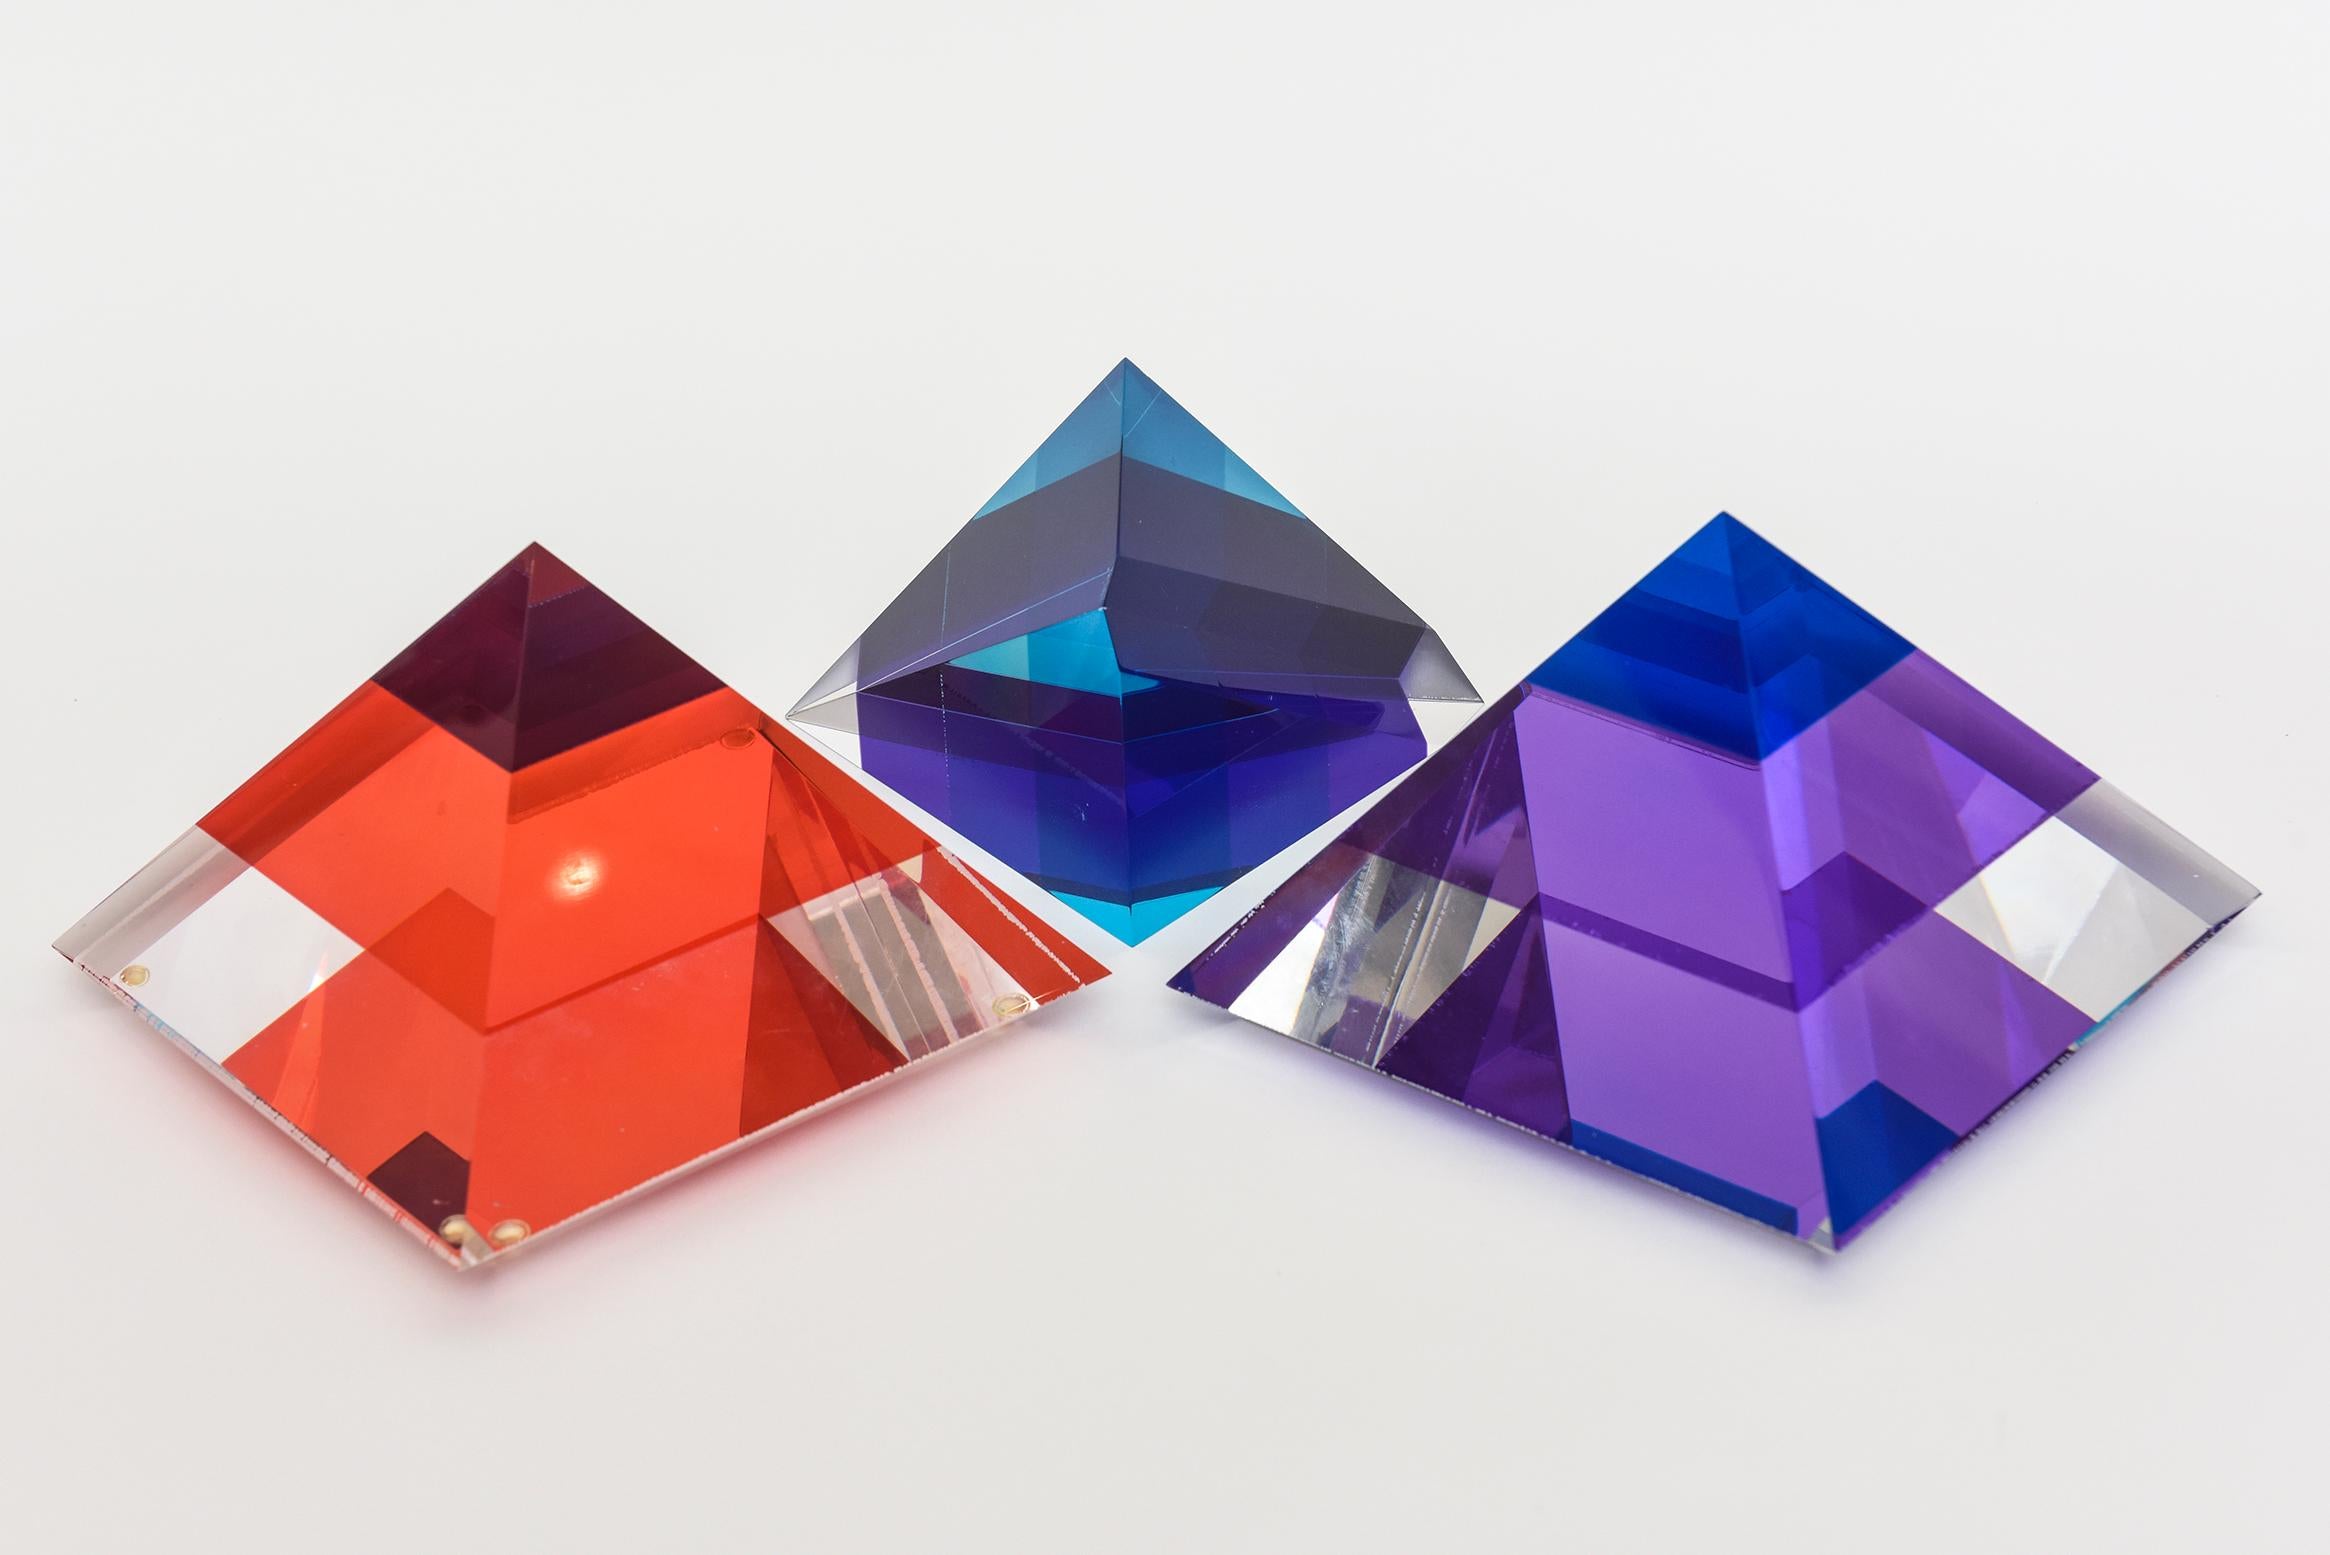 This collection of lucite jewel toned sculptures in orange, red, sapphire blue and purple are two pyramids and one abstract form. They glisten with gorgeous colors and make a great still love of color and energy. They are by 3 different artists, 2